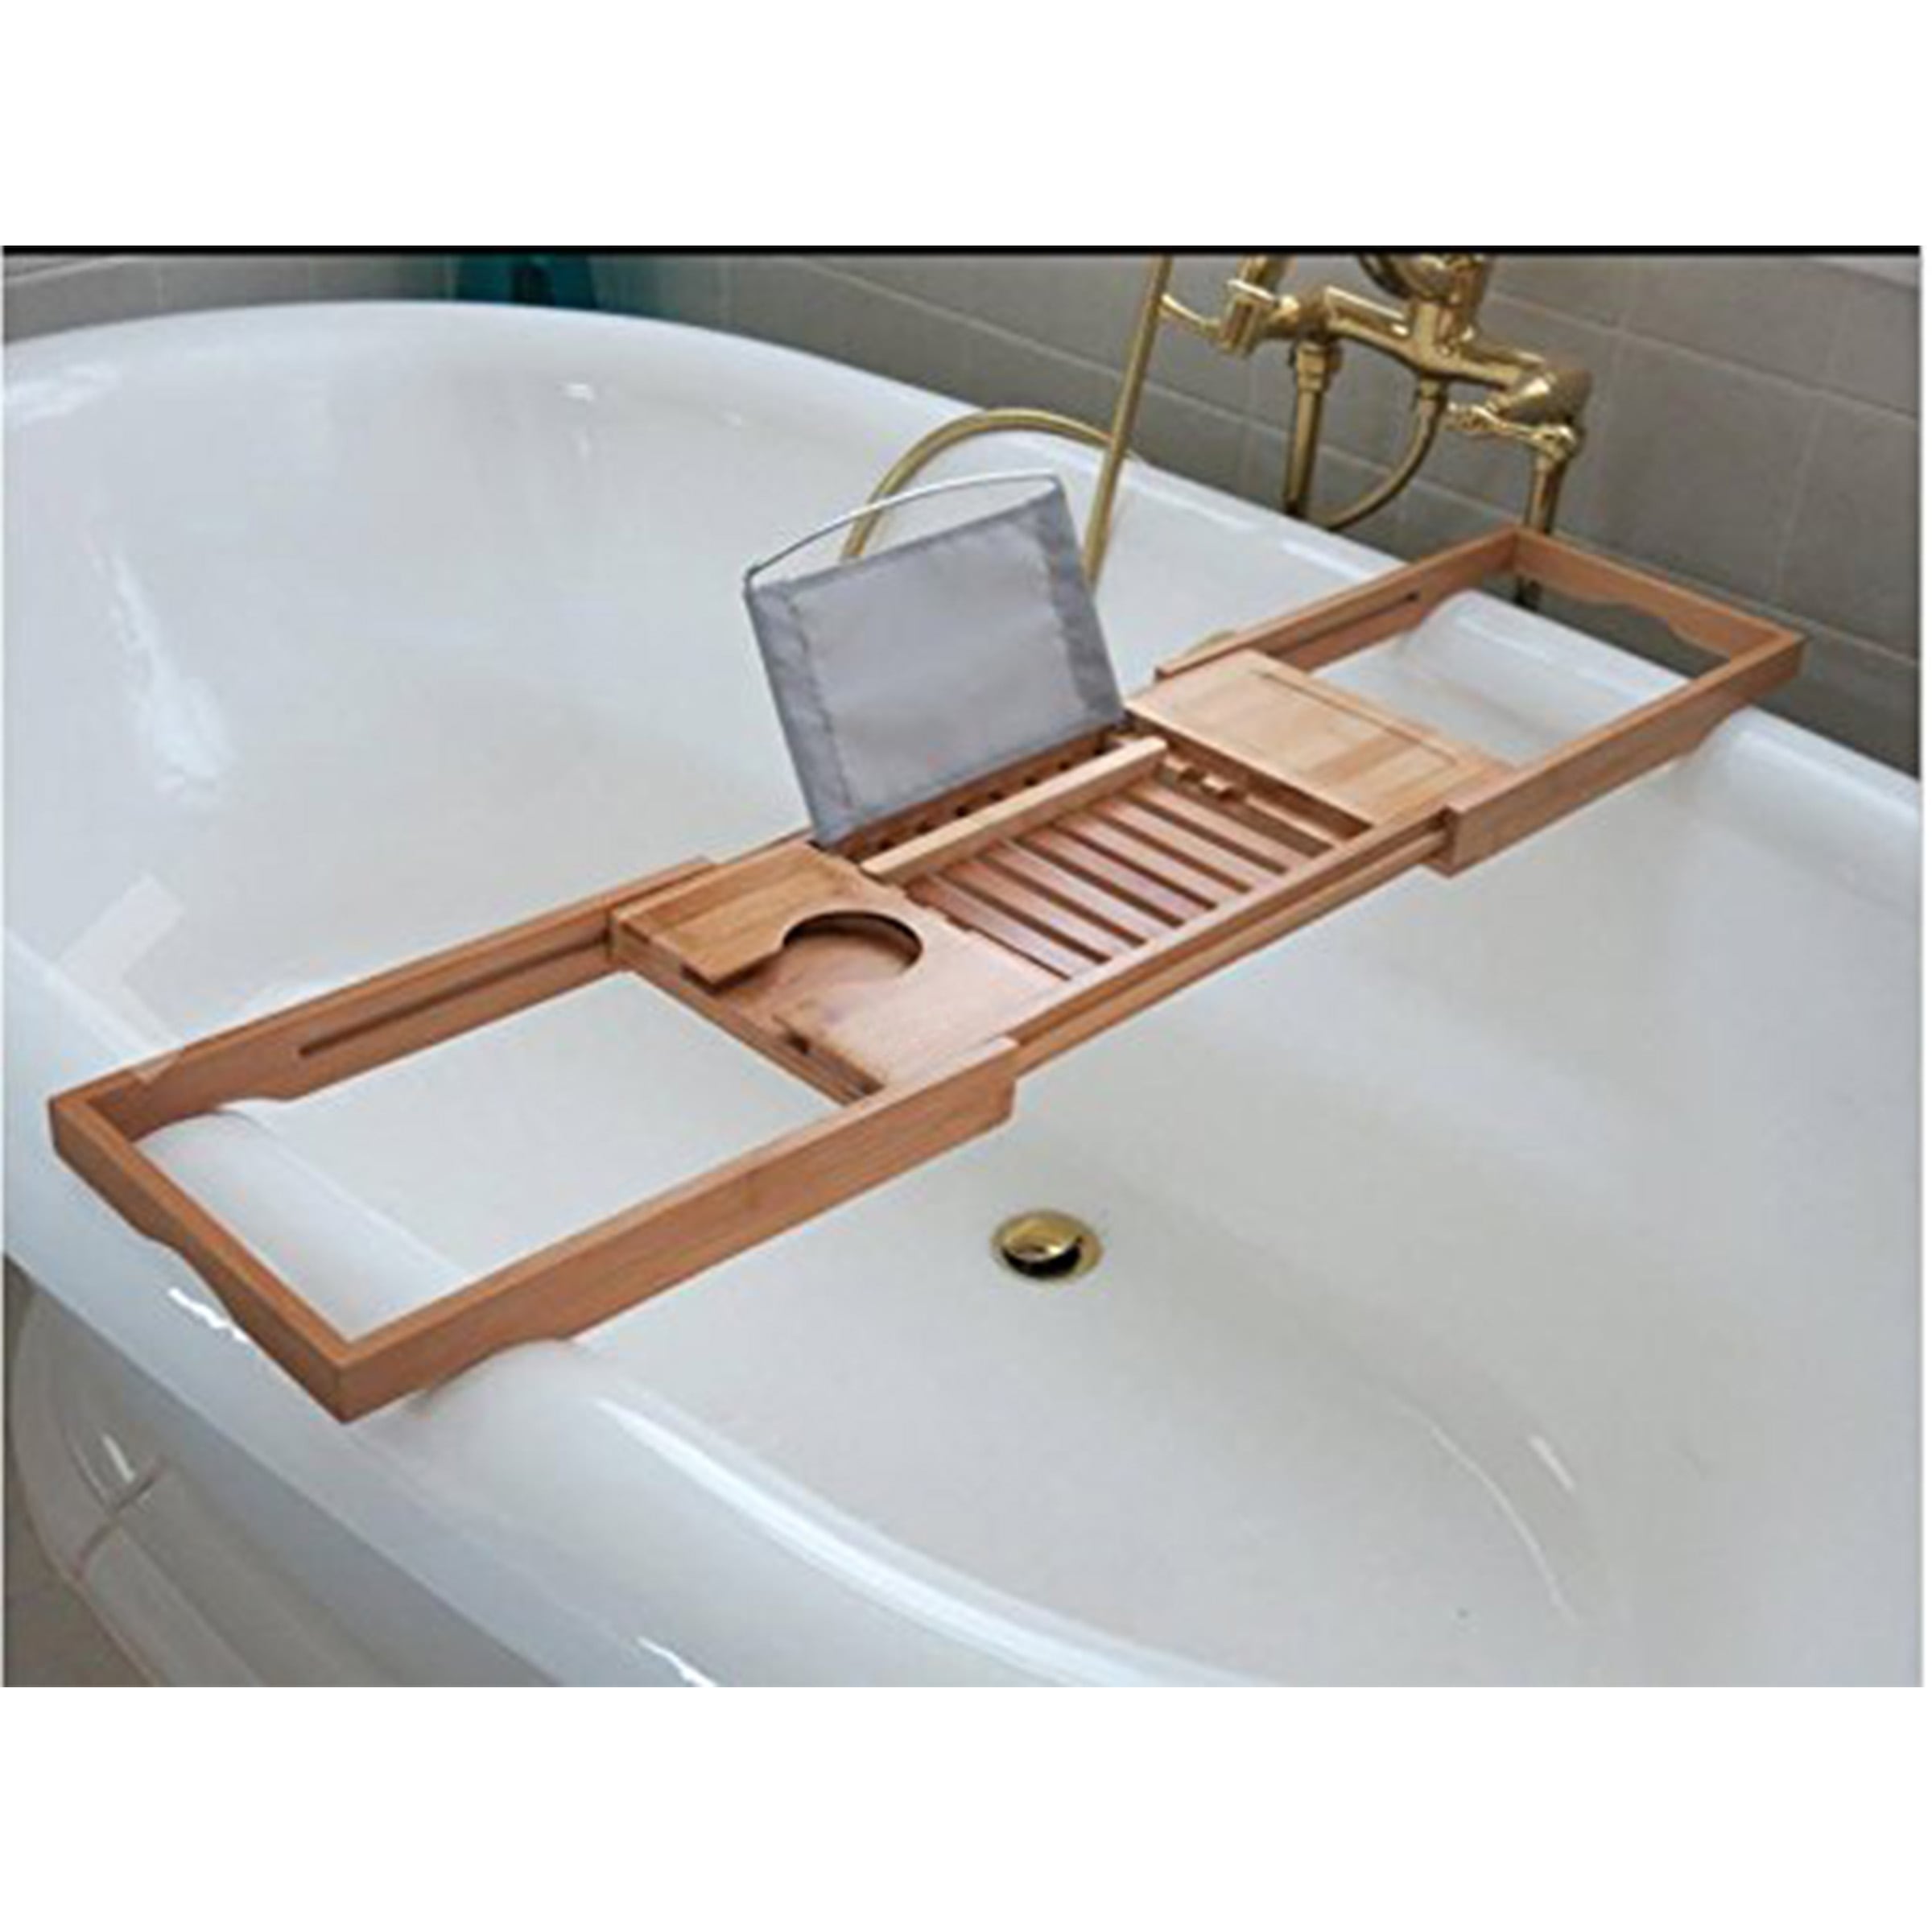 LANGRIA 100% Natural Bamboo Bathtub Caddy Over-the-Tub Tray